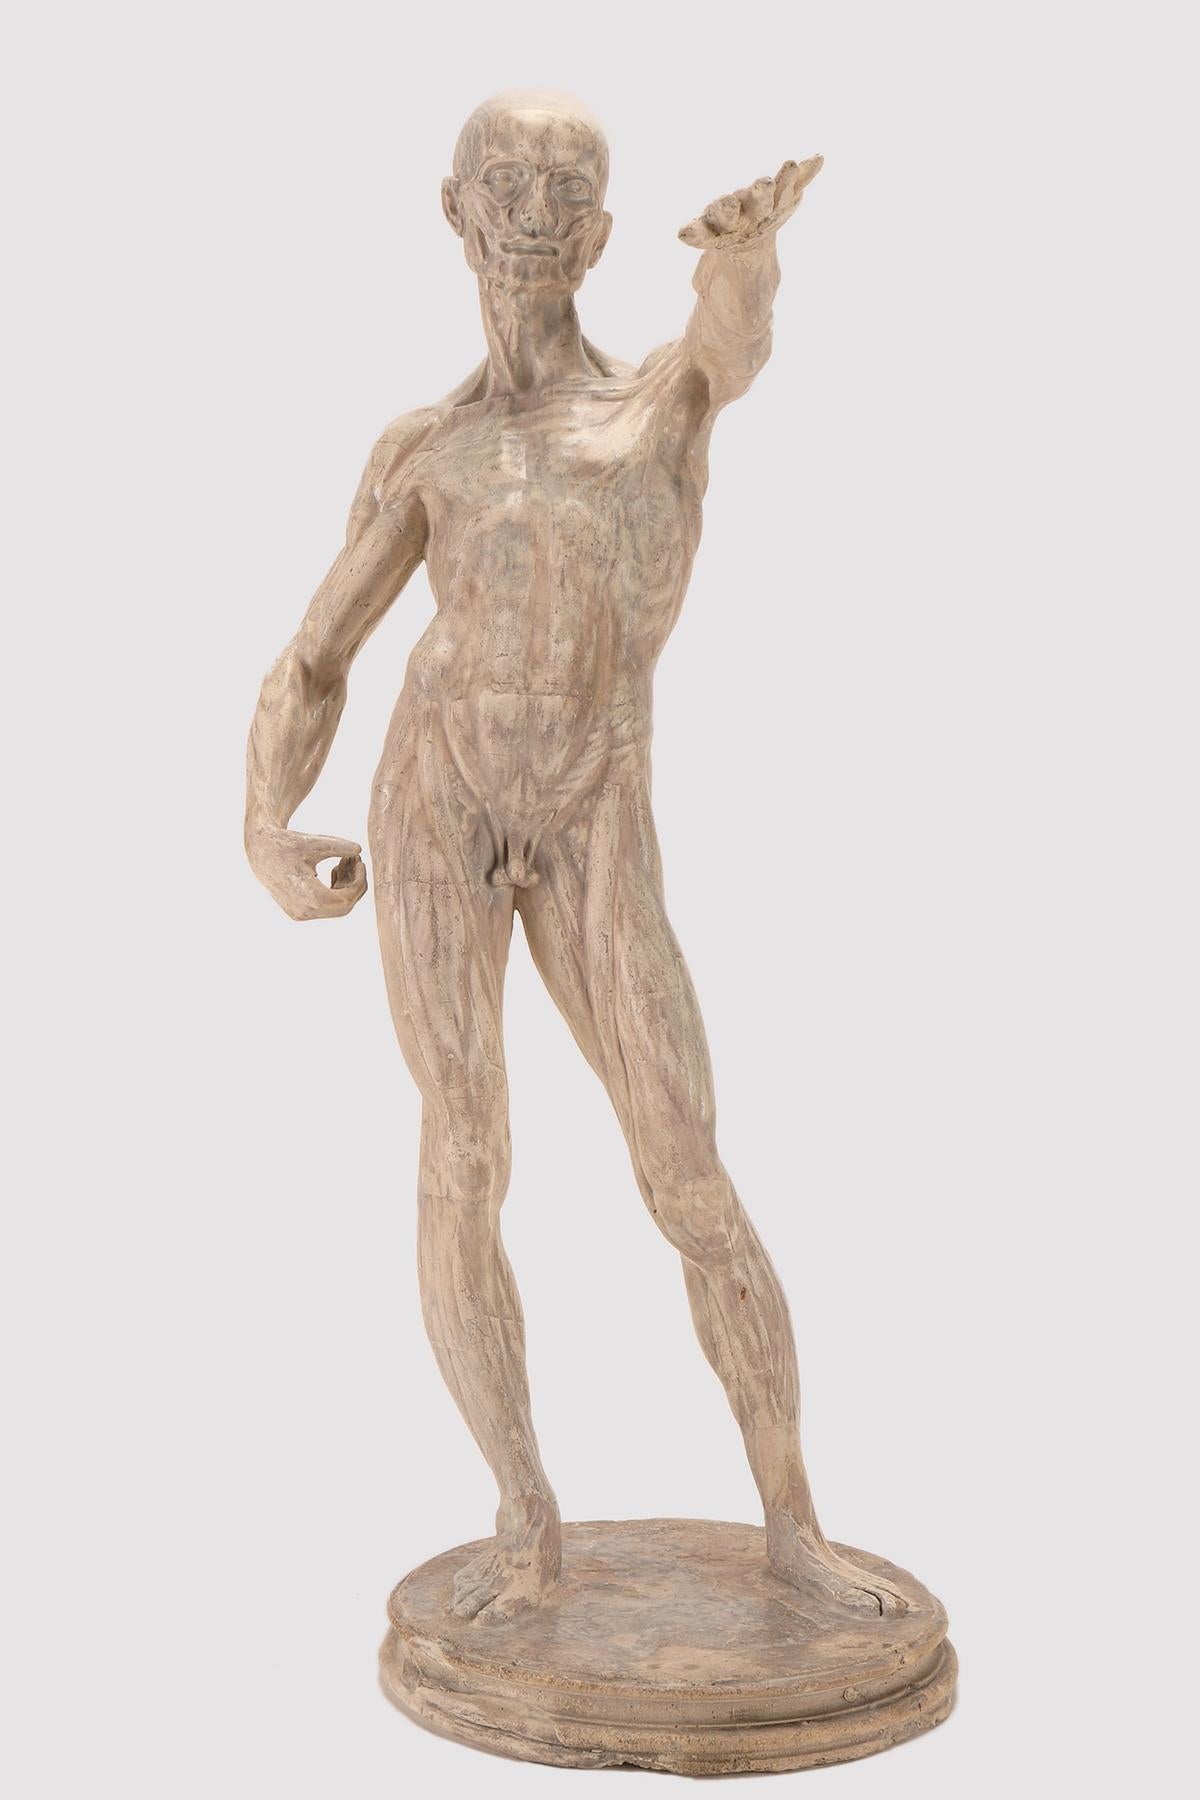 An anatomical sculpture in plaster, depicting a skinned man standing on a round base in a classic raised arm pose. use for an anatomical study. Italy, circa 1880.